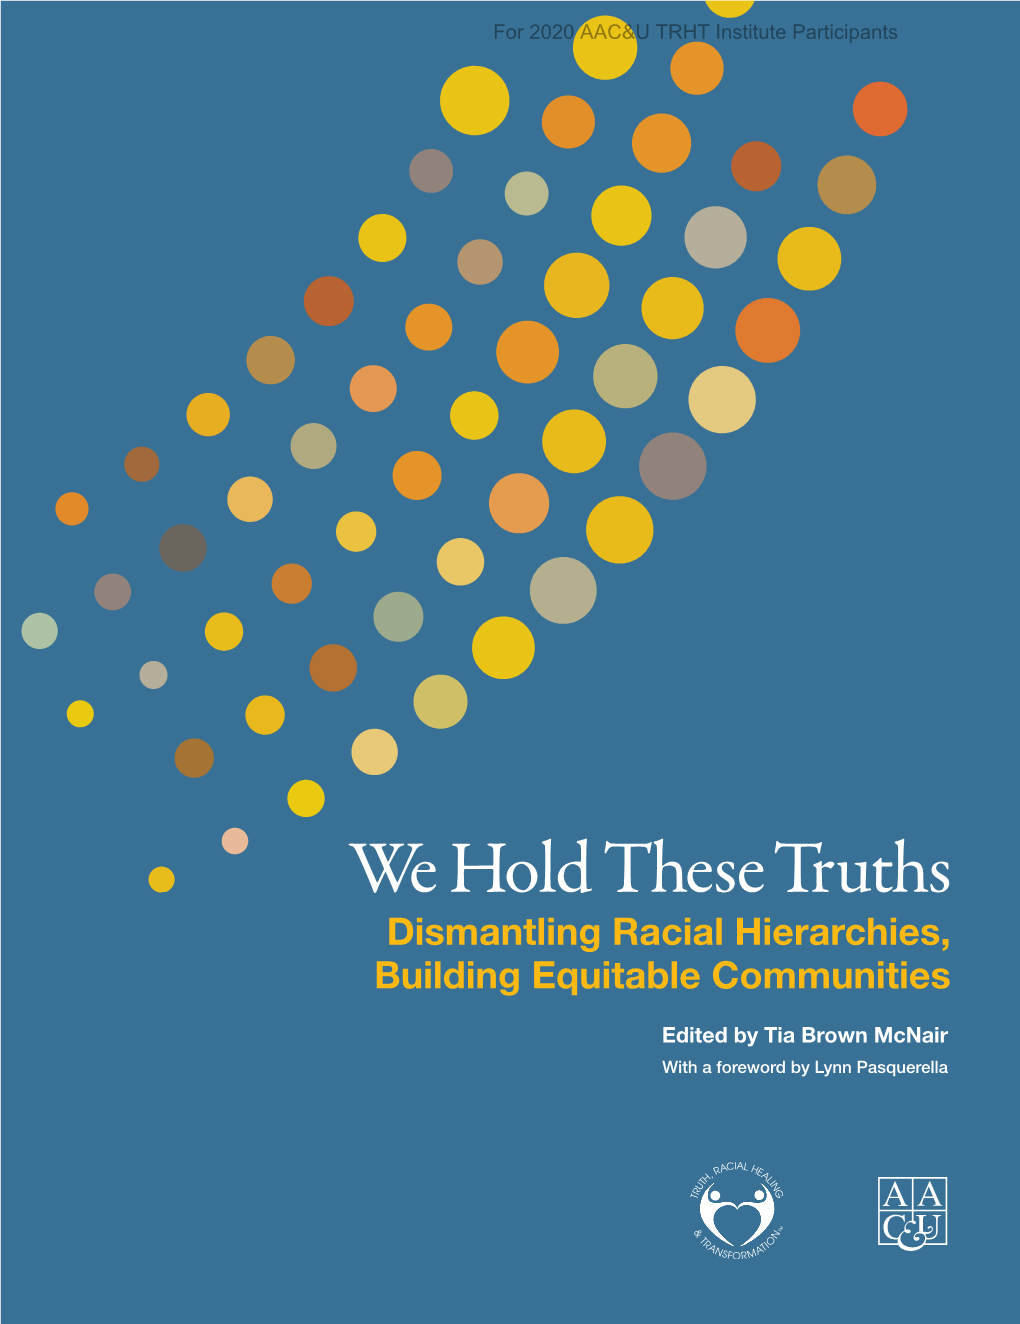 We Hold These Truths Dismantling Racial Hierarchies, Building Equitable Communities